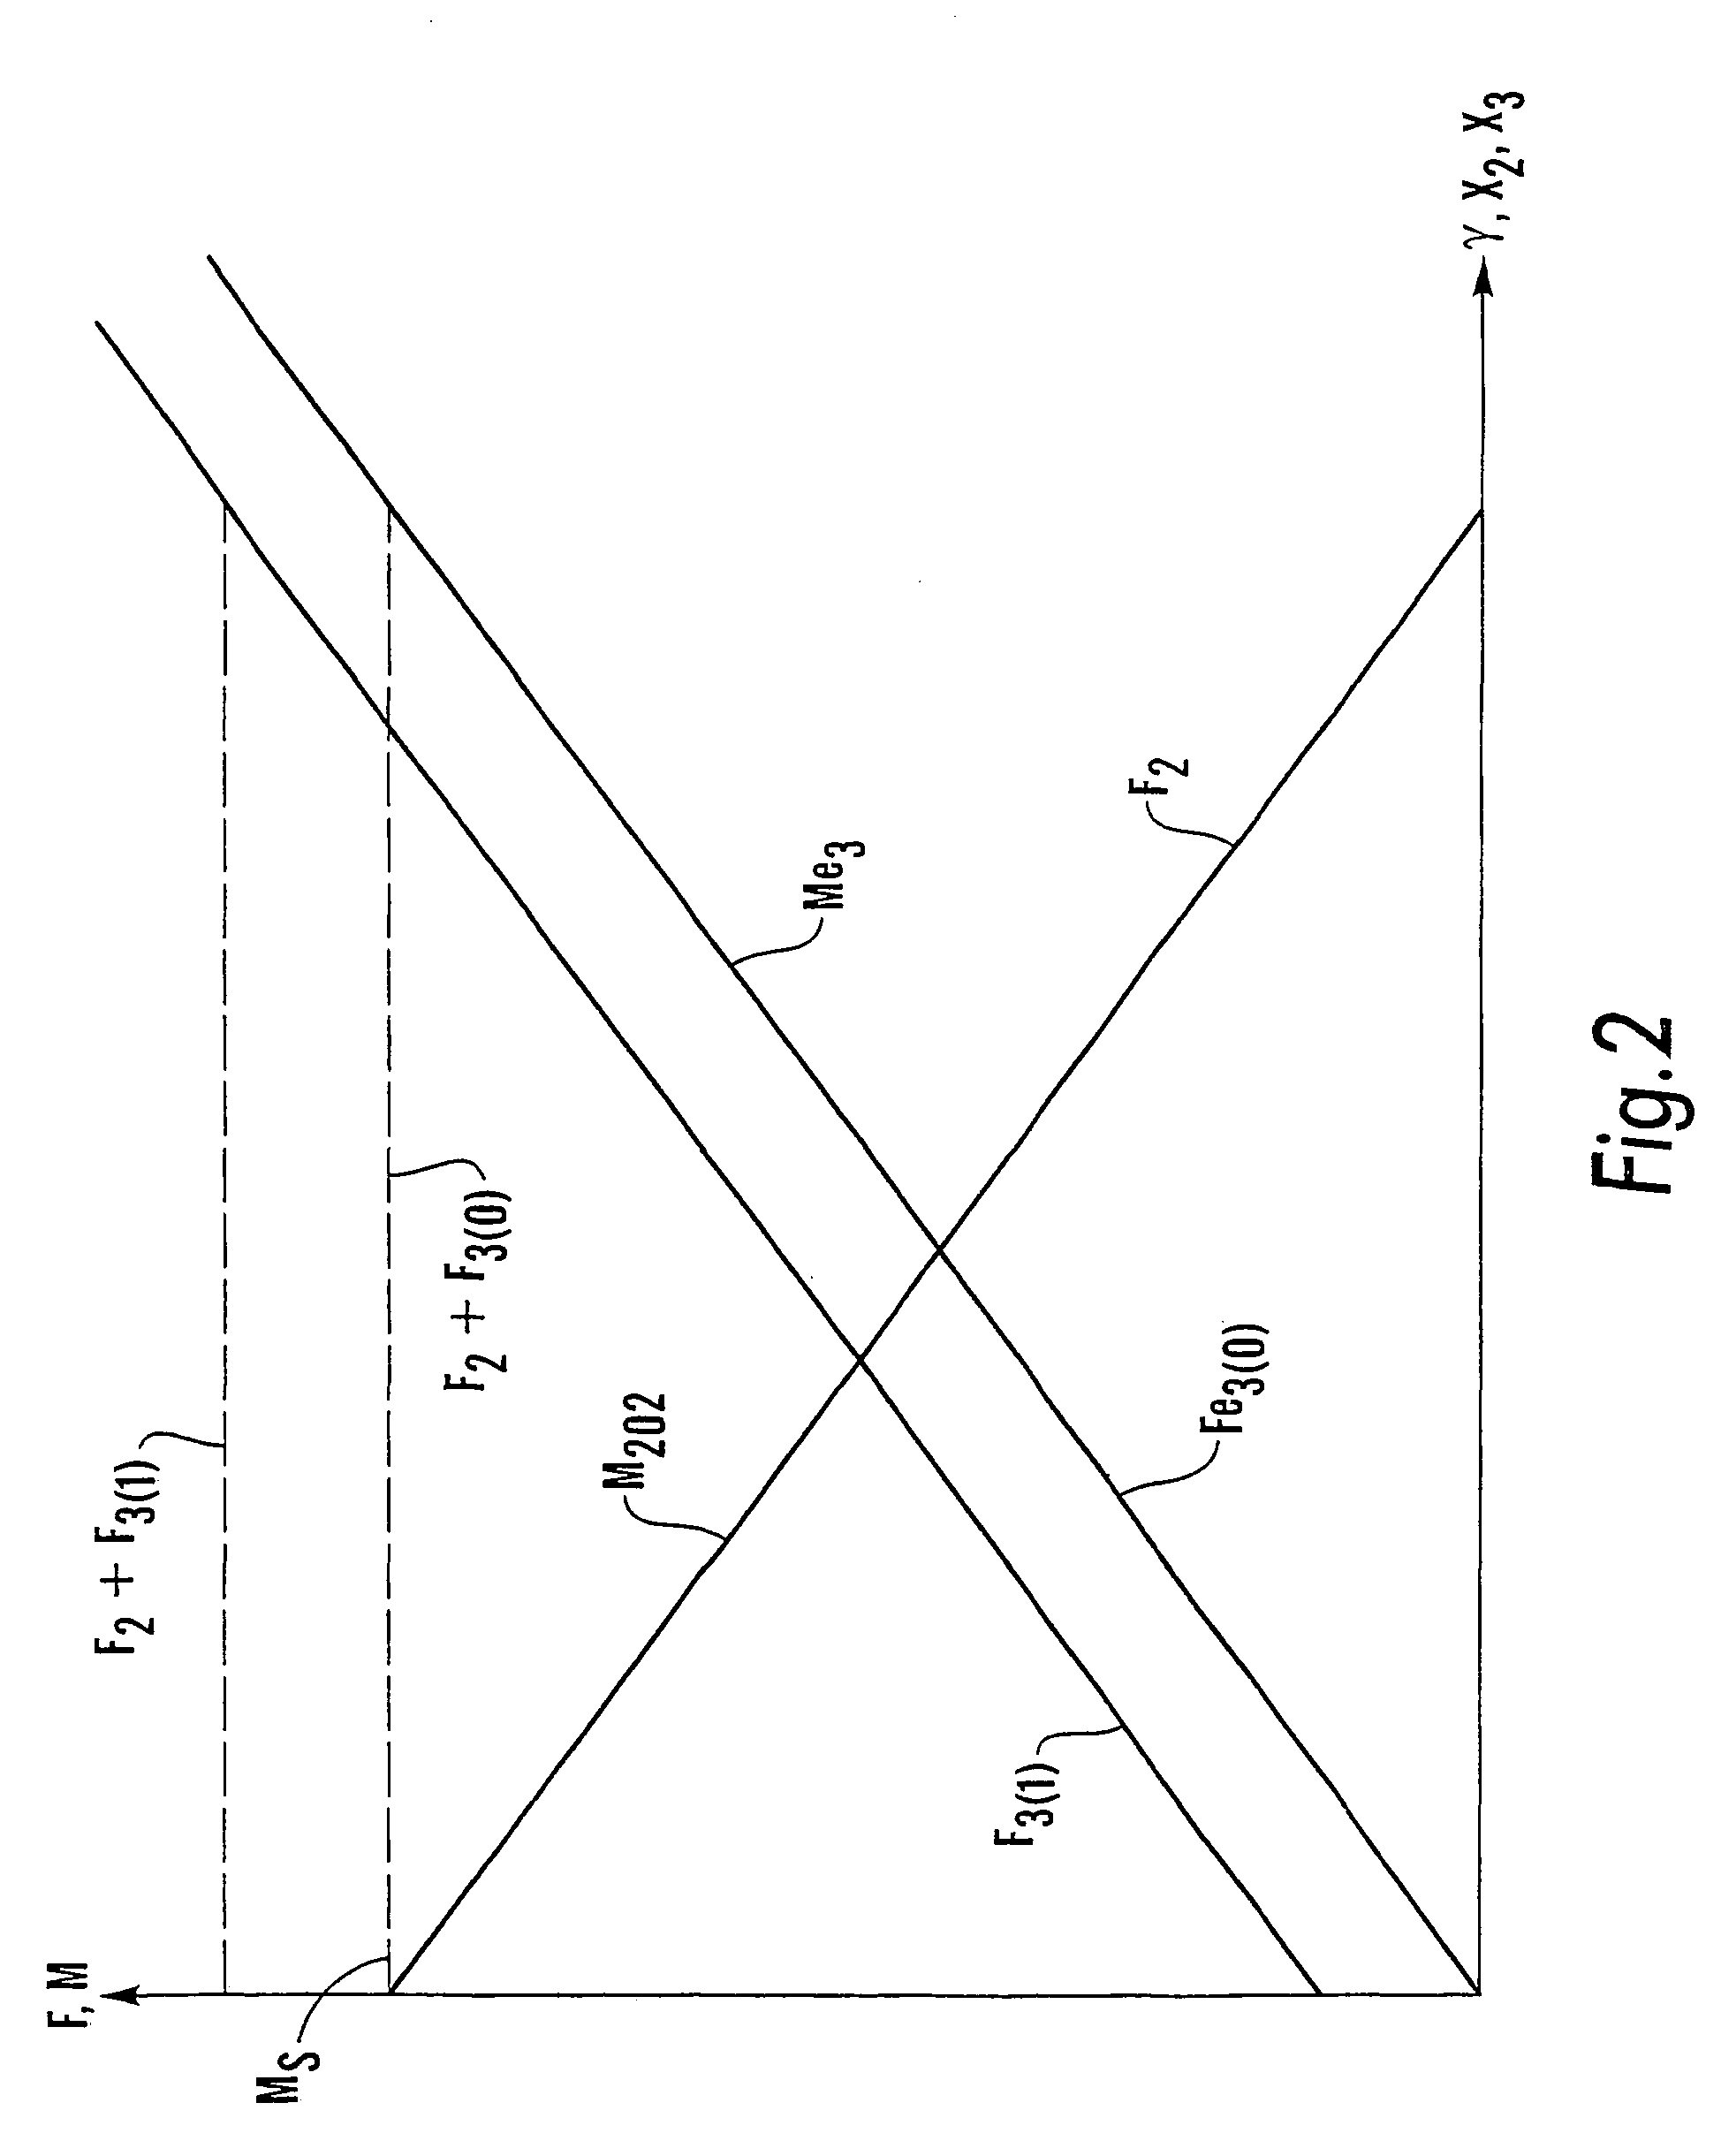 Device for obtaining a predefined linear force